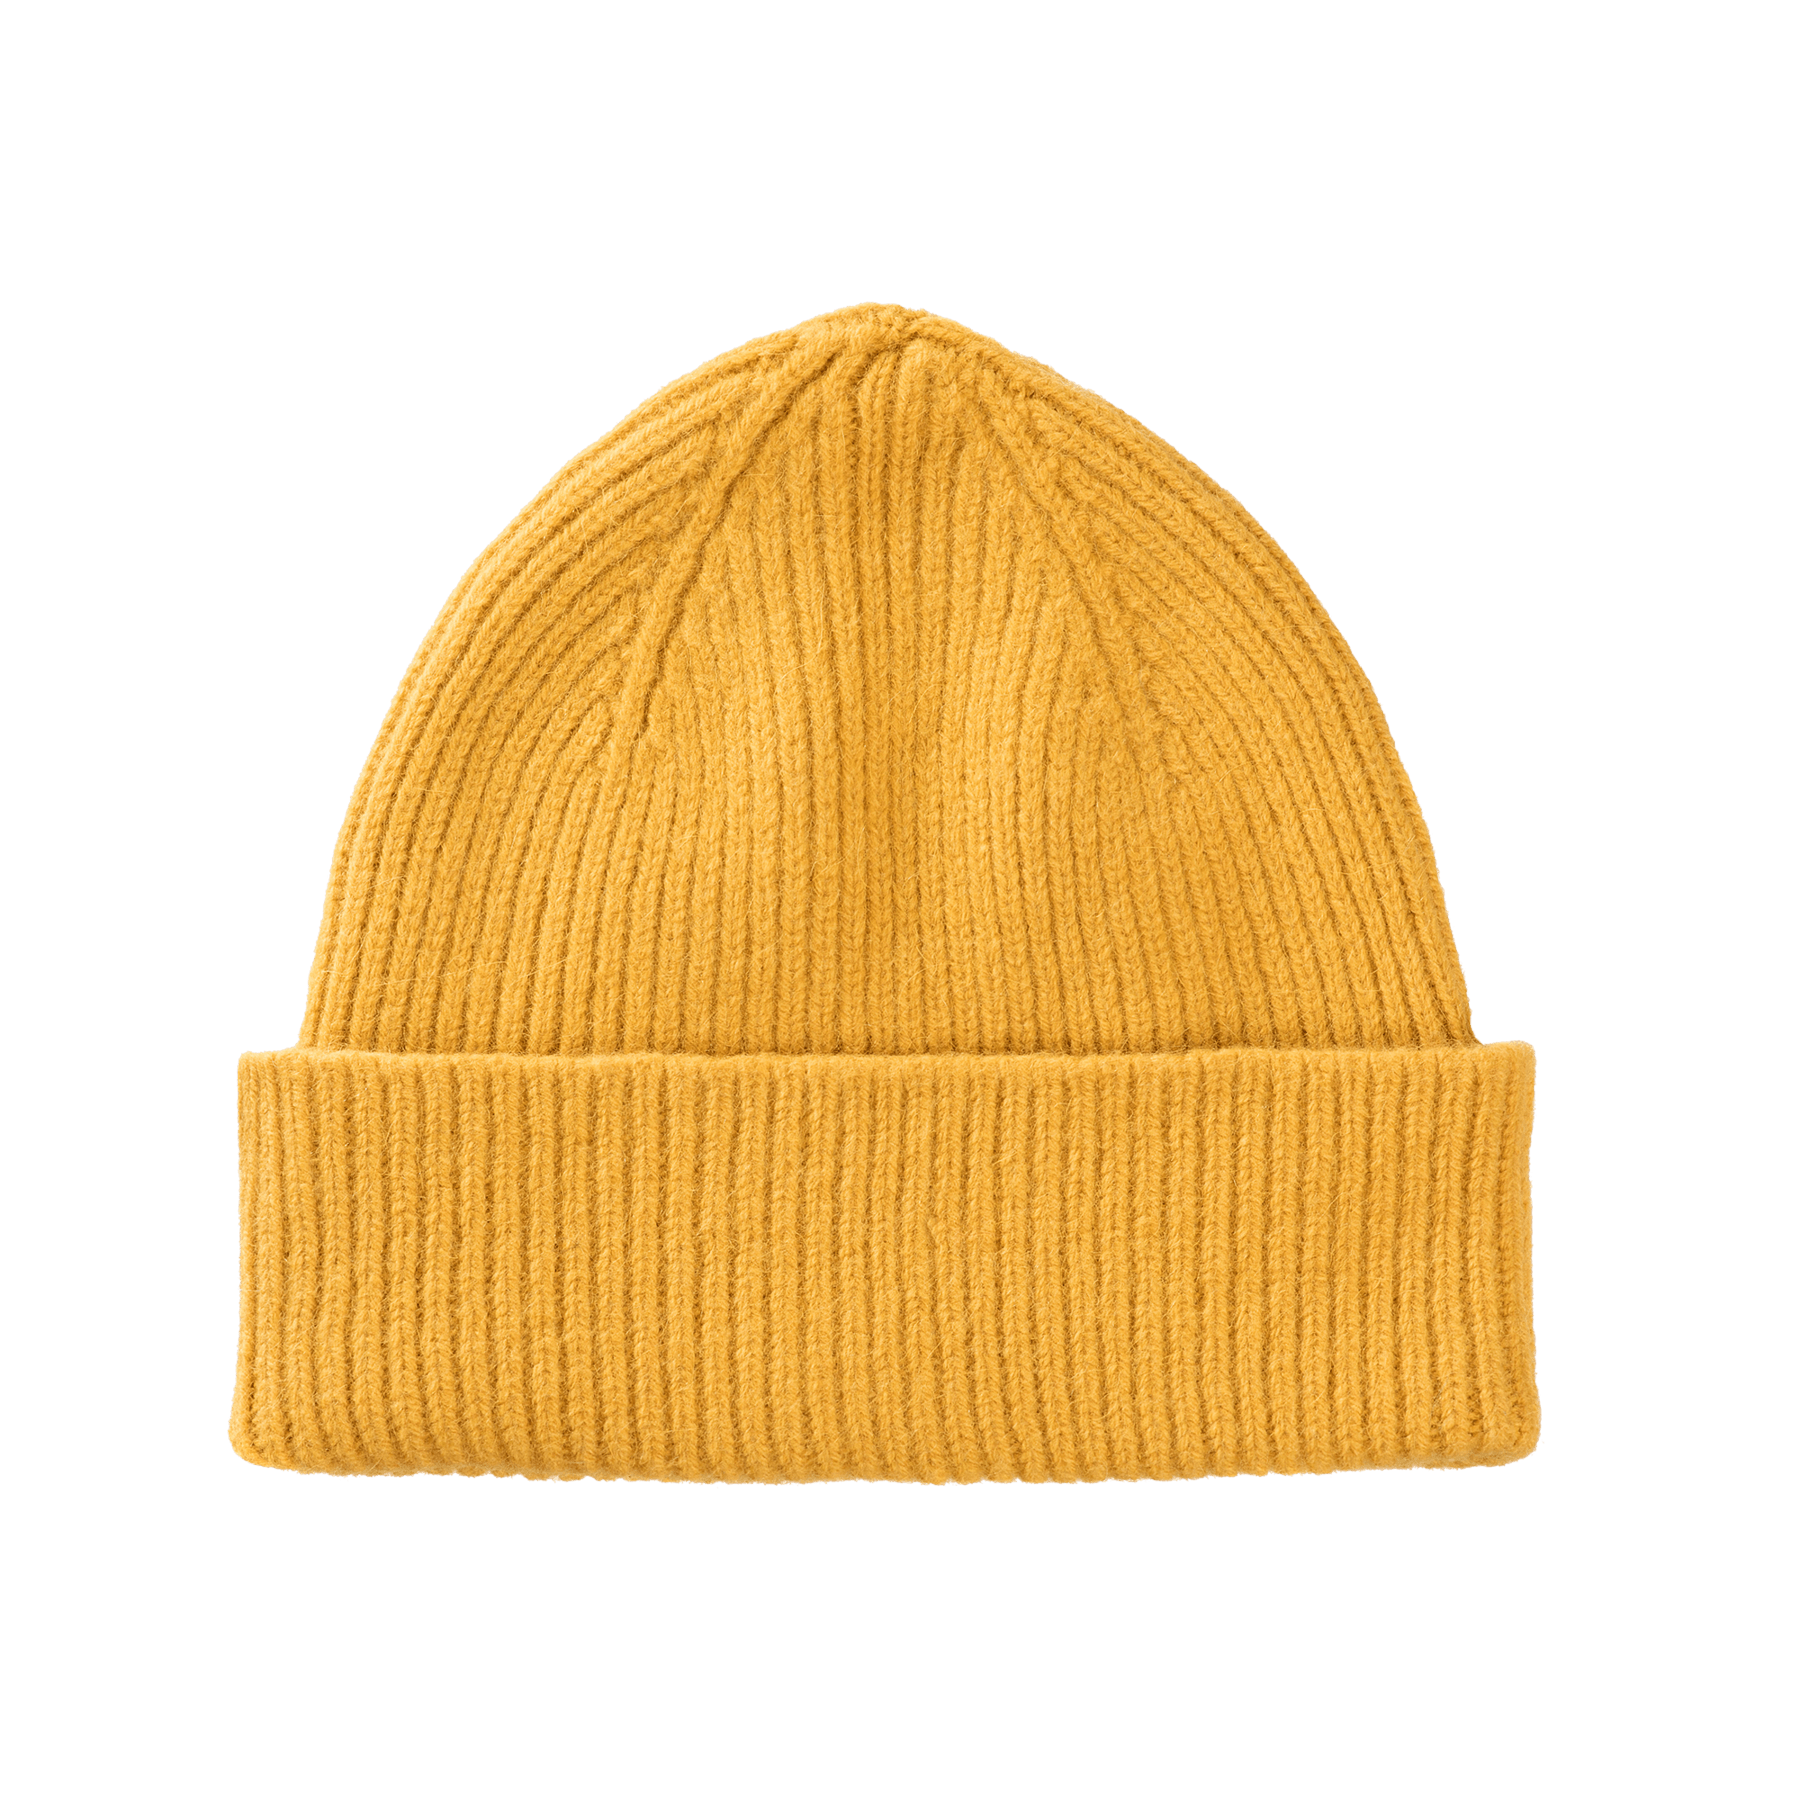 Wool and Caregora Bonnet Beanie in Mustard. Available at EASE Toronto. 